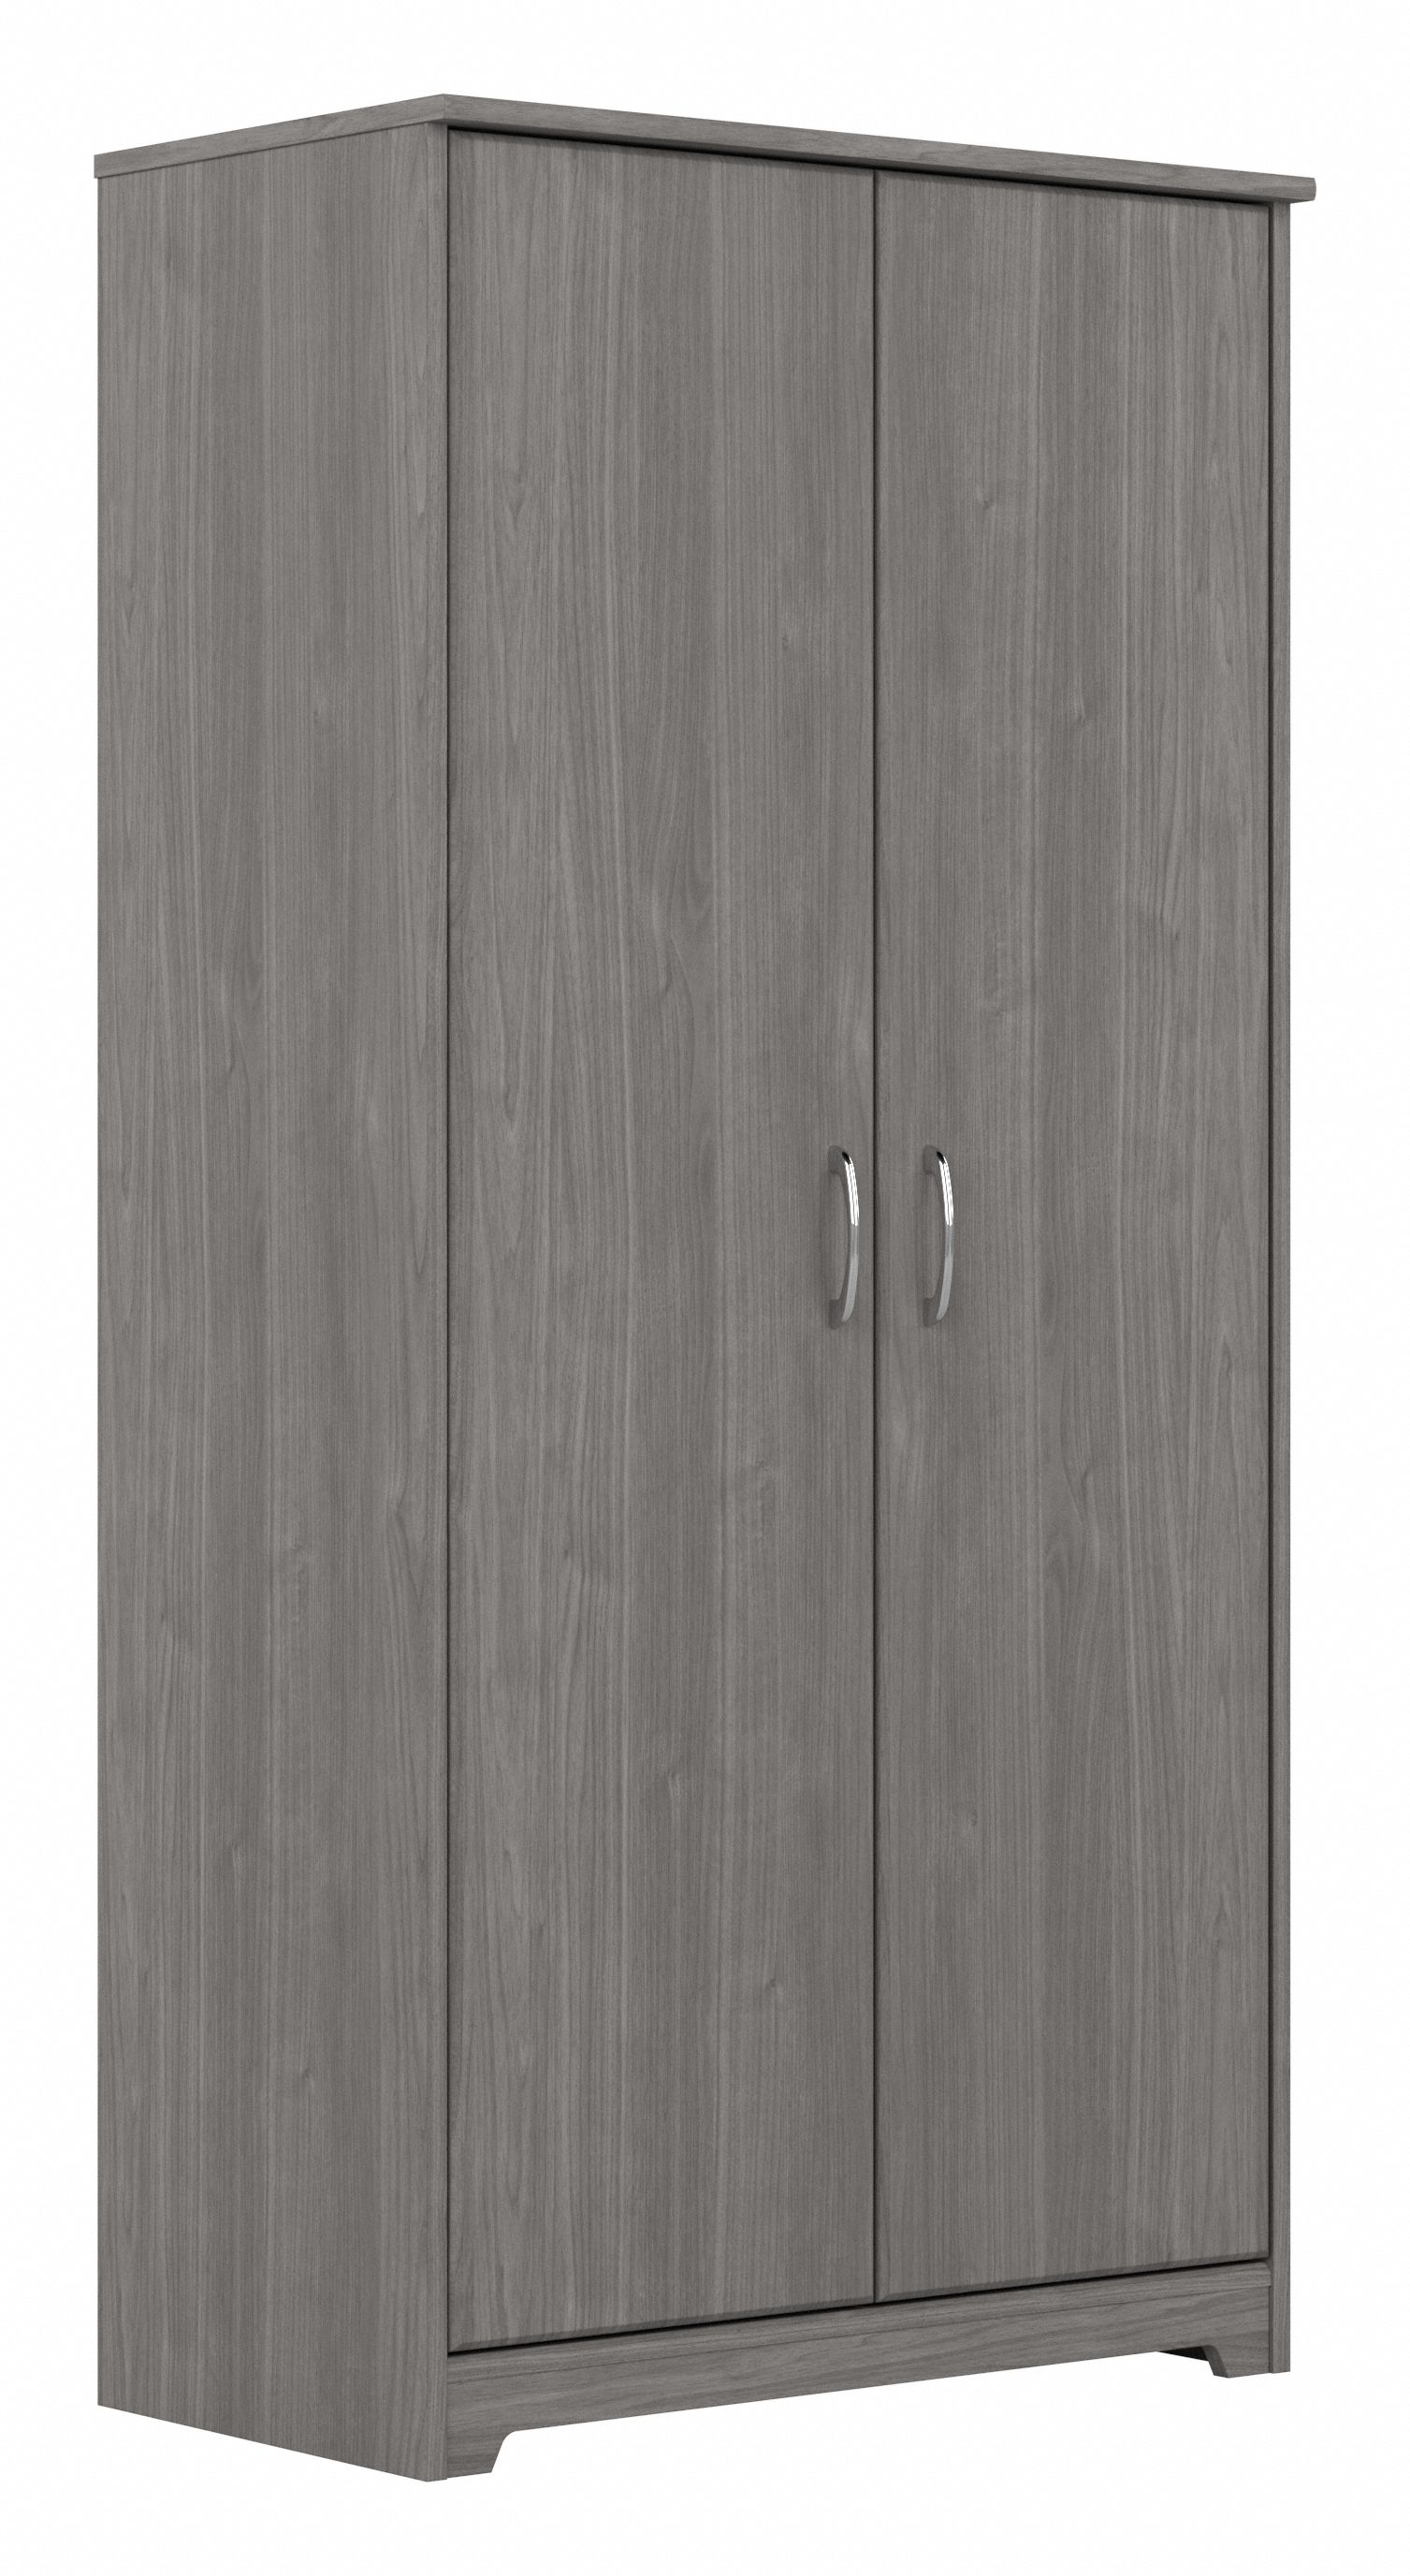 Shop Bush Furniture Cabot Tall Bathroom Storage Cabinet with Doors 02 WC31399-Z1 #color_modern gray